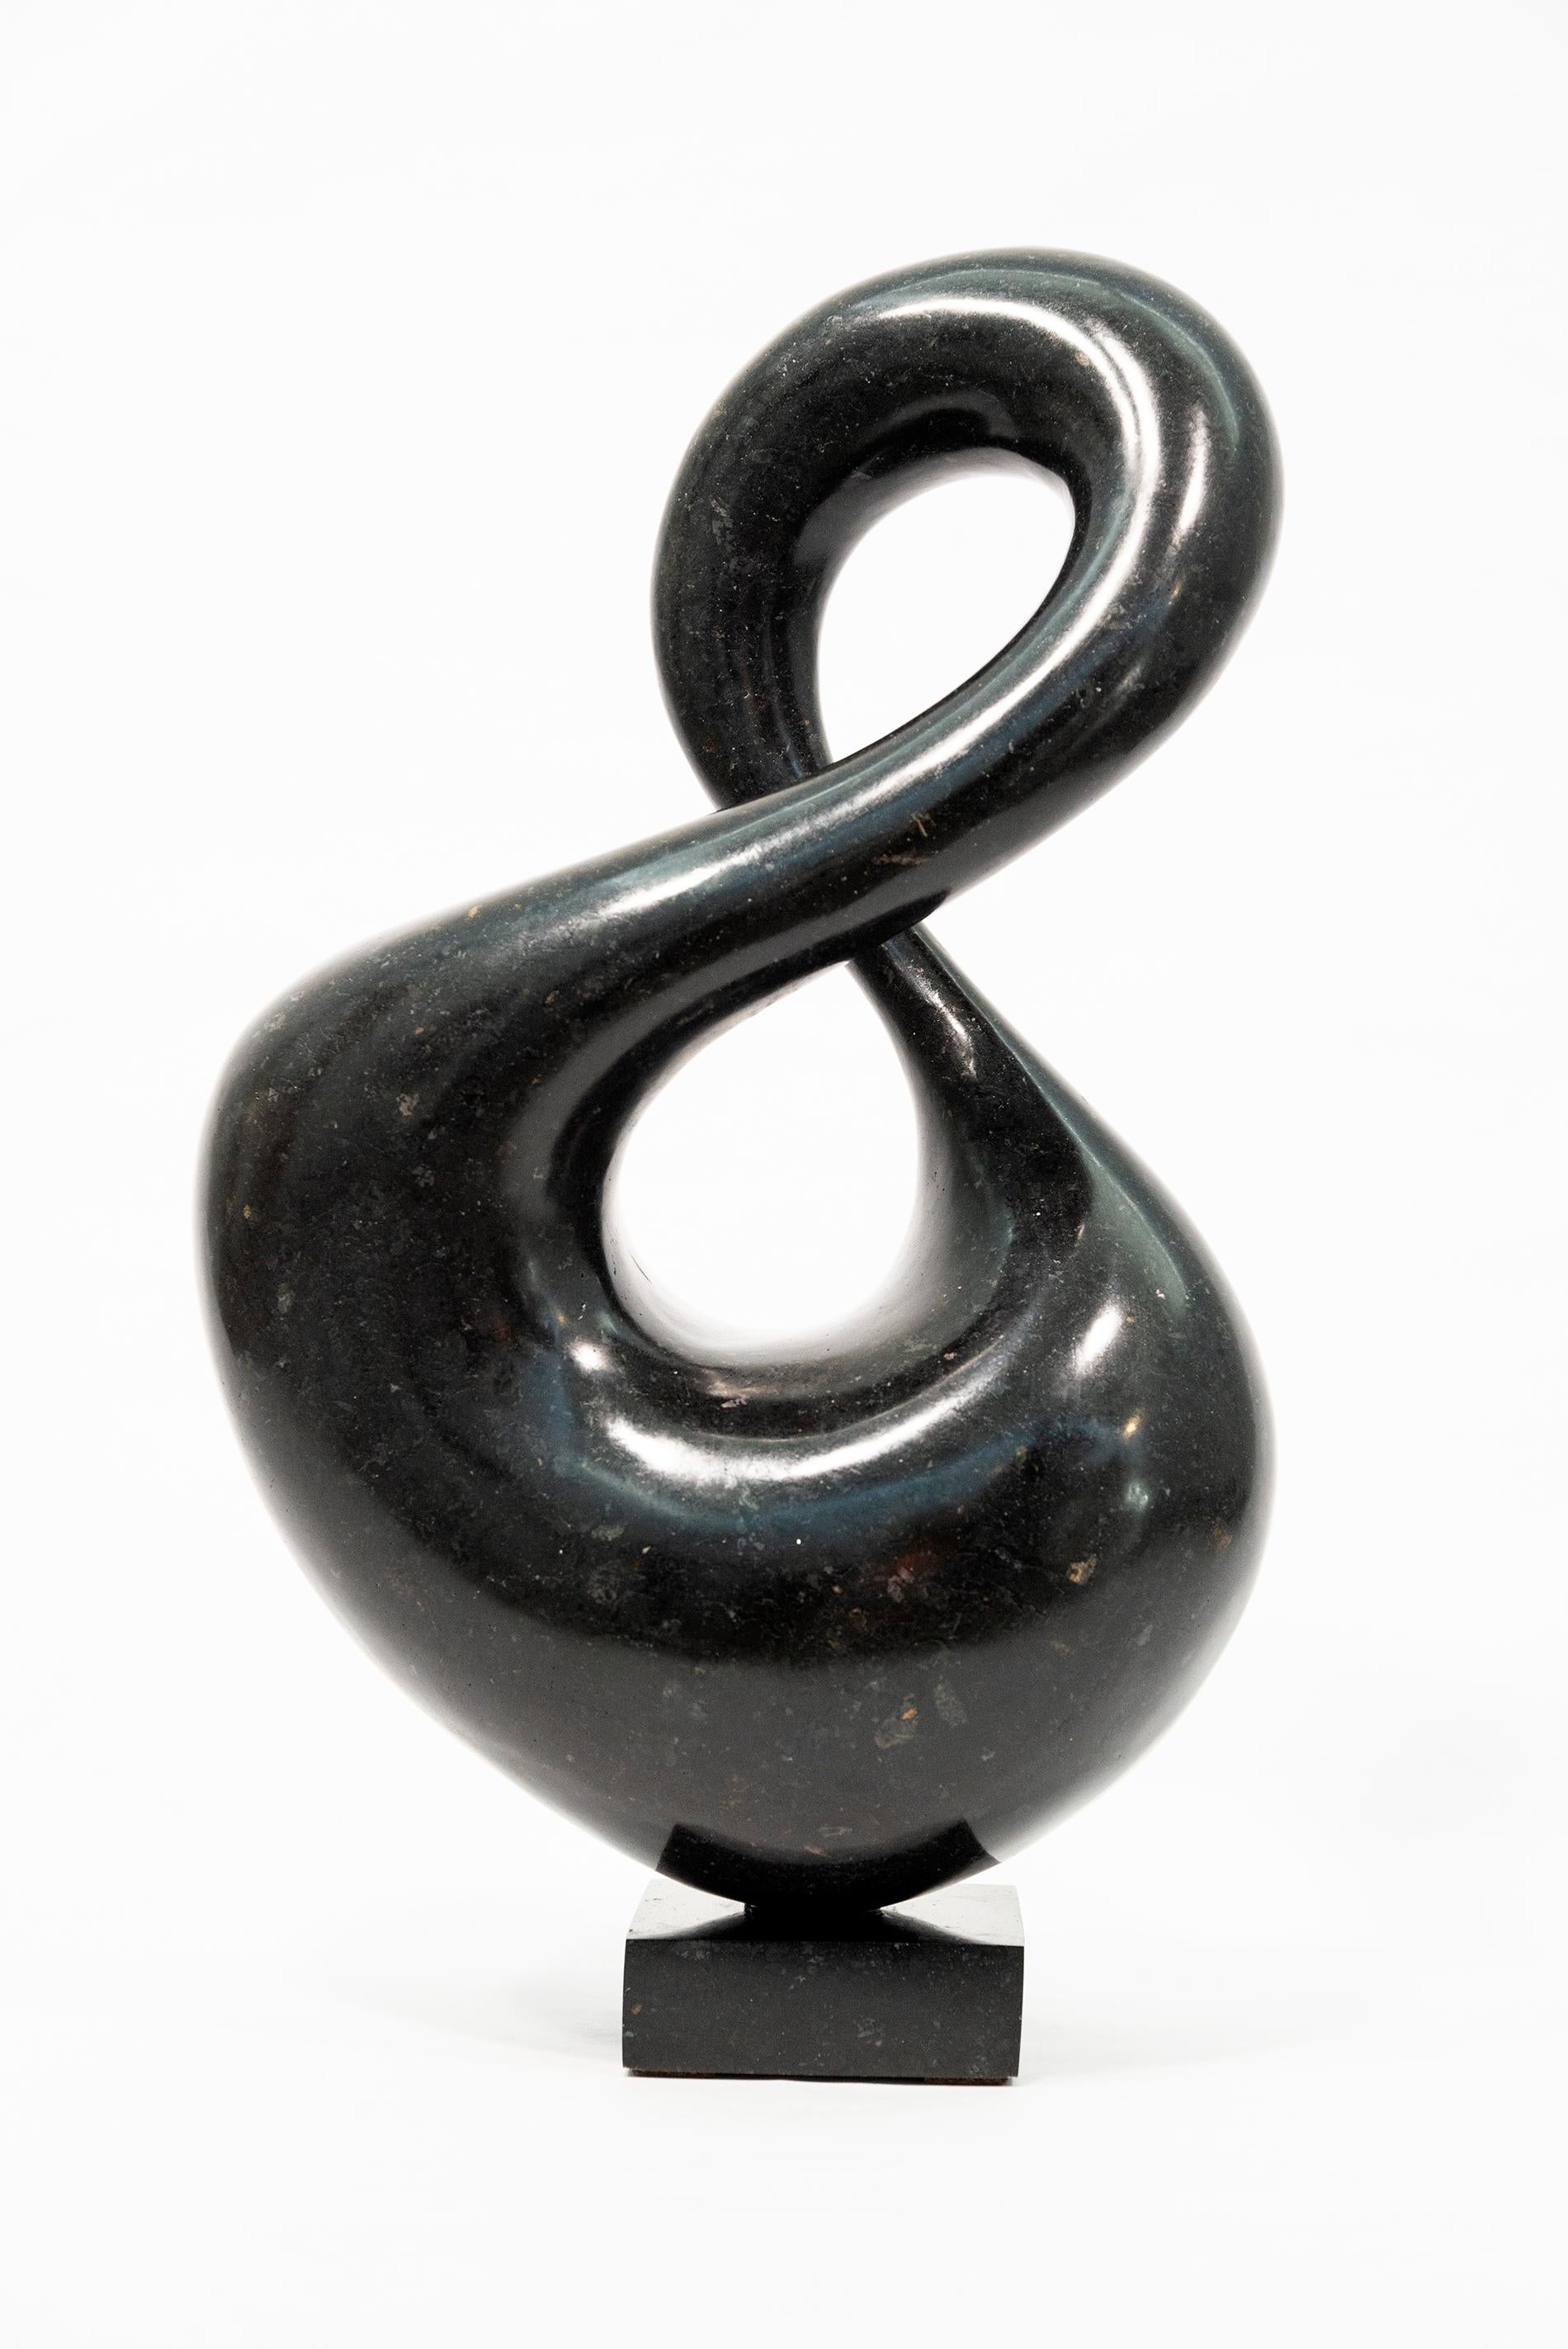 With its fluid and elegant lines, this abstract stone sculpture by Jeremy Guy appears to resemble a figure eight. Guy is known for his powerful contemporary form that often emulates shapes found in nature. Created from engineered black granite, this